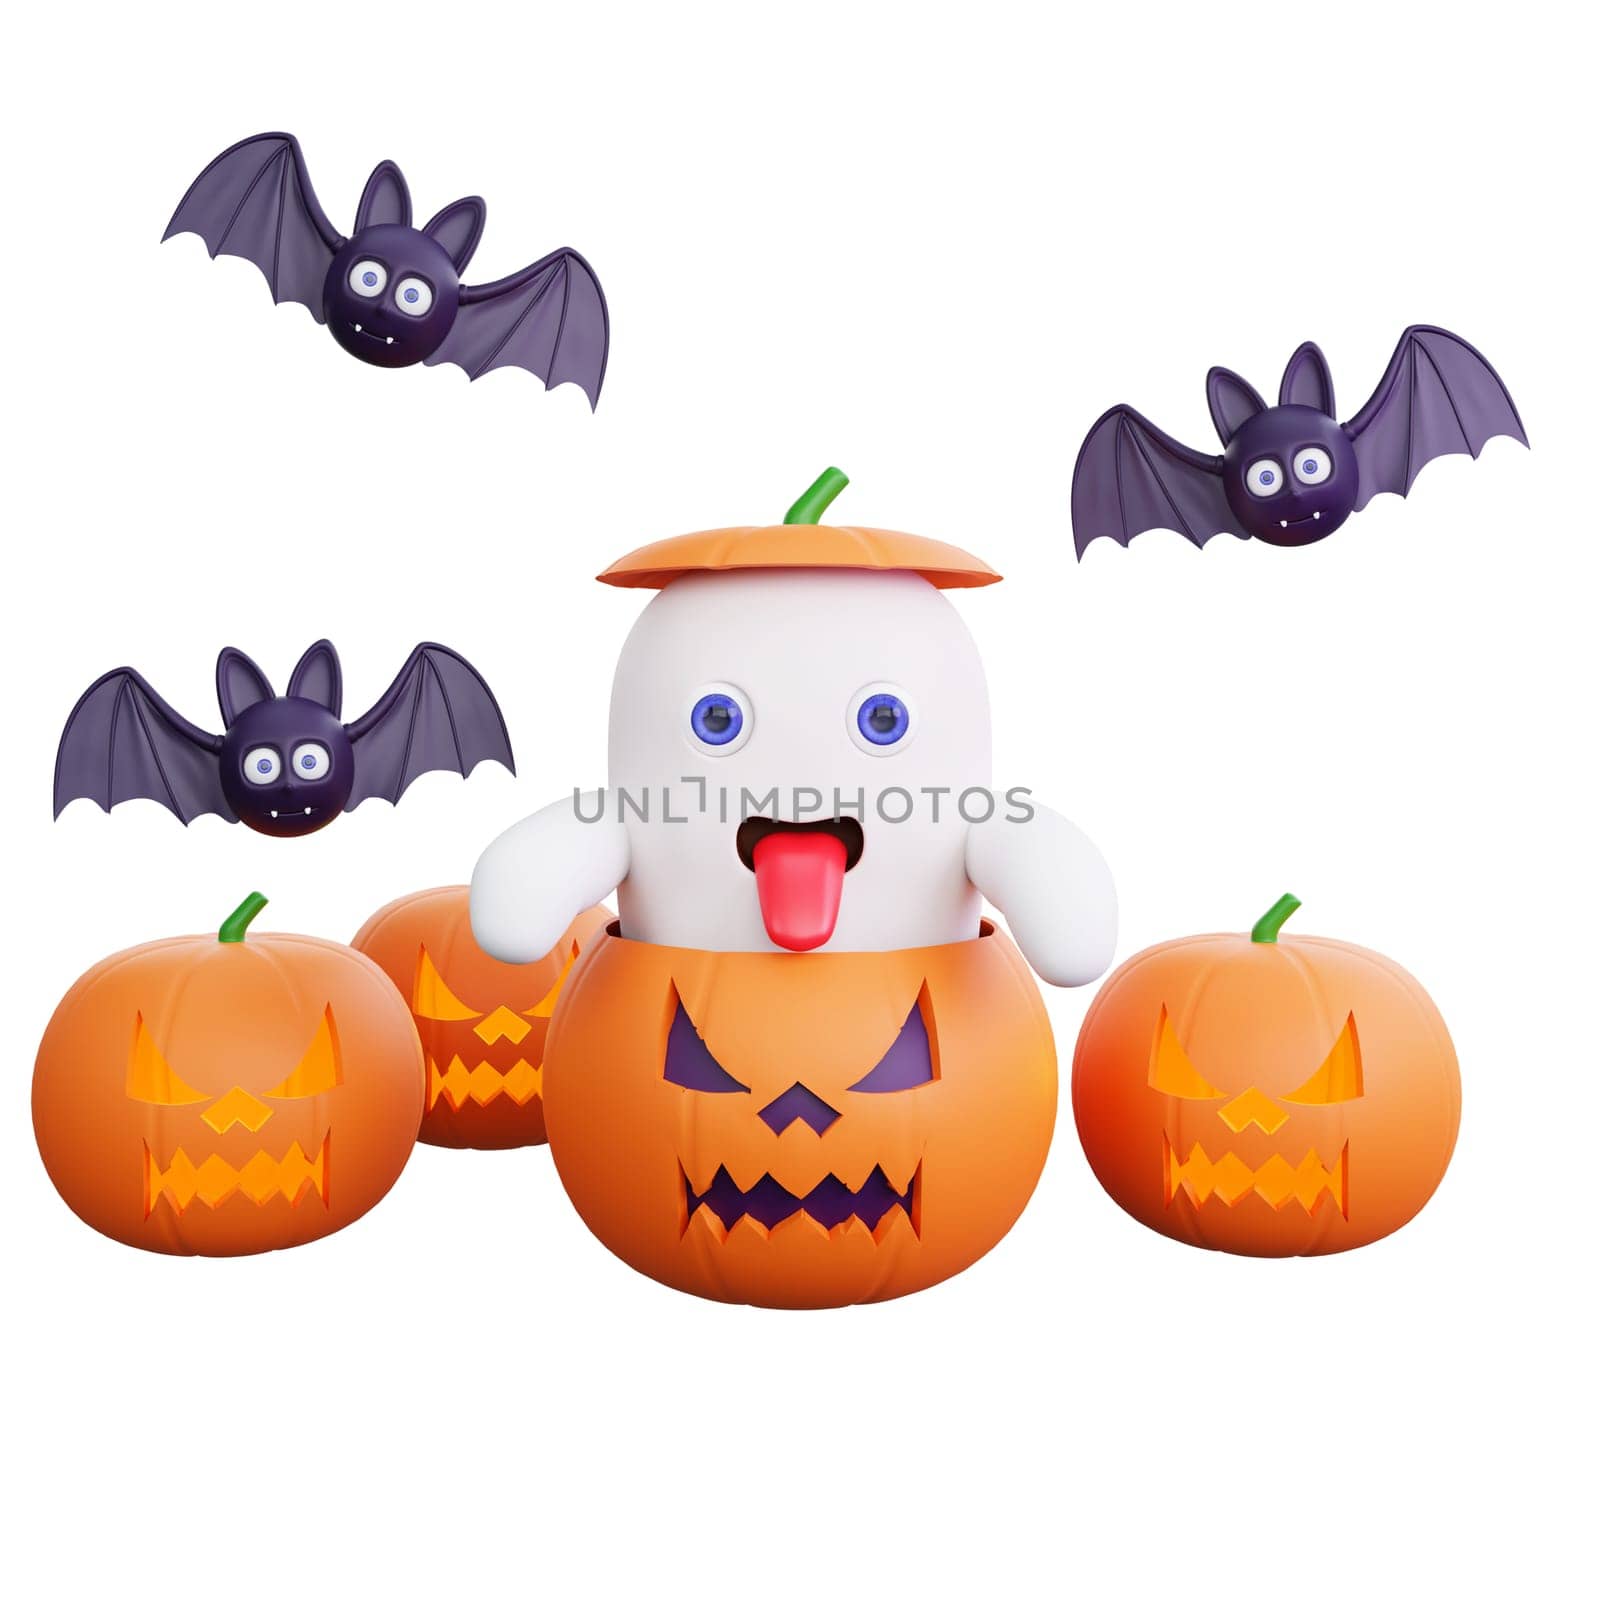 3D playful ghost inside a pumpkin, surrounded by pumpkins scary and flying bats. Perfect for the Halloween season